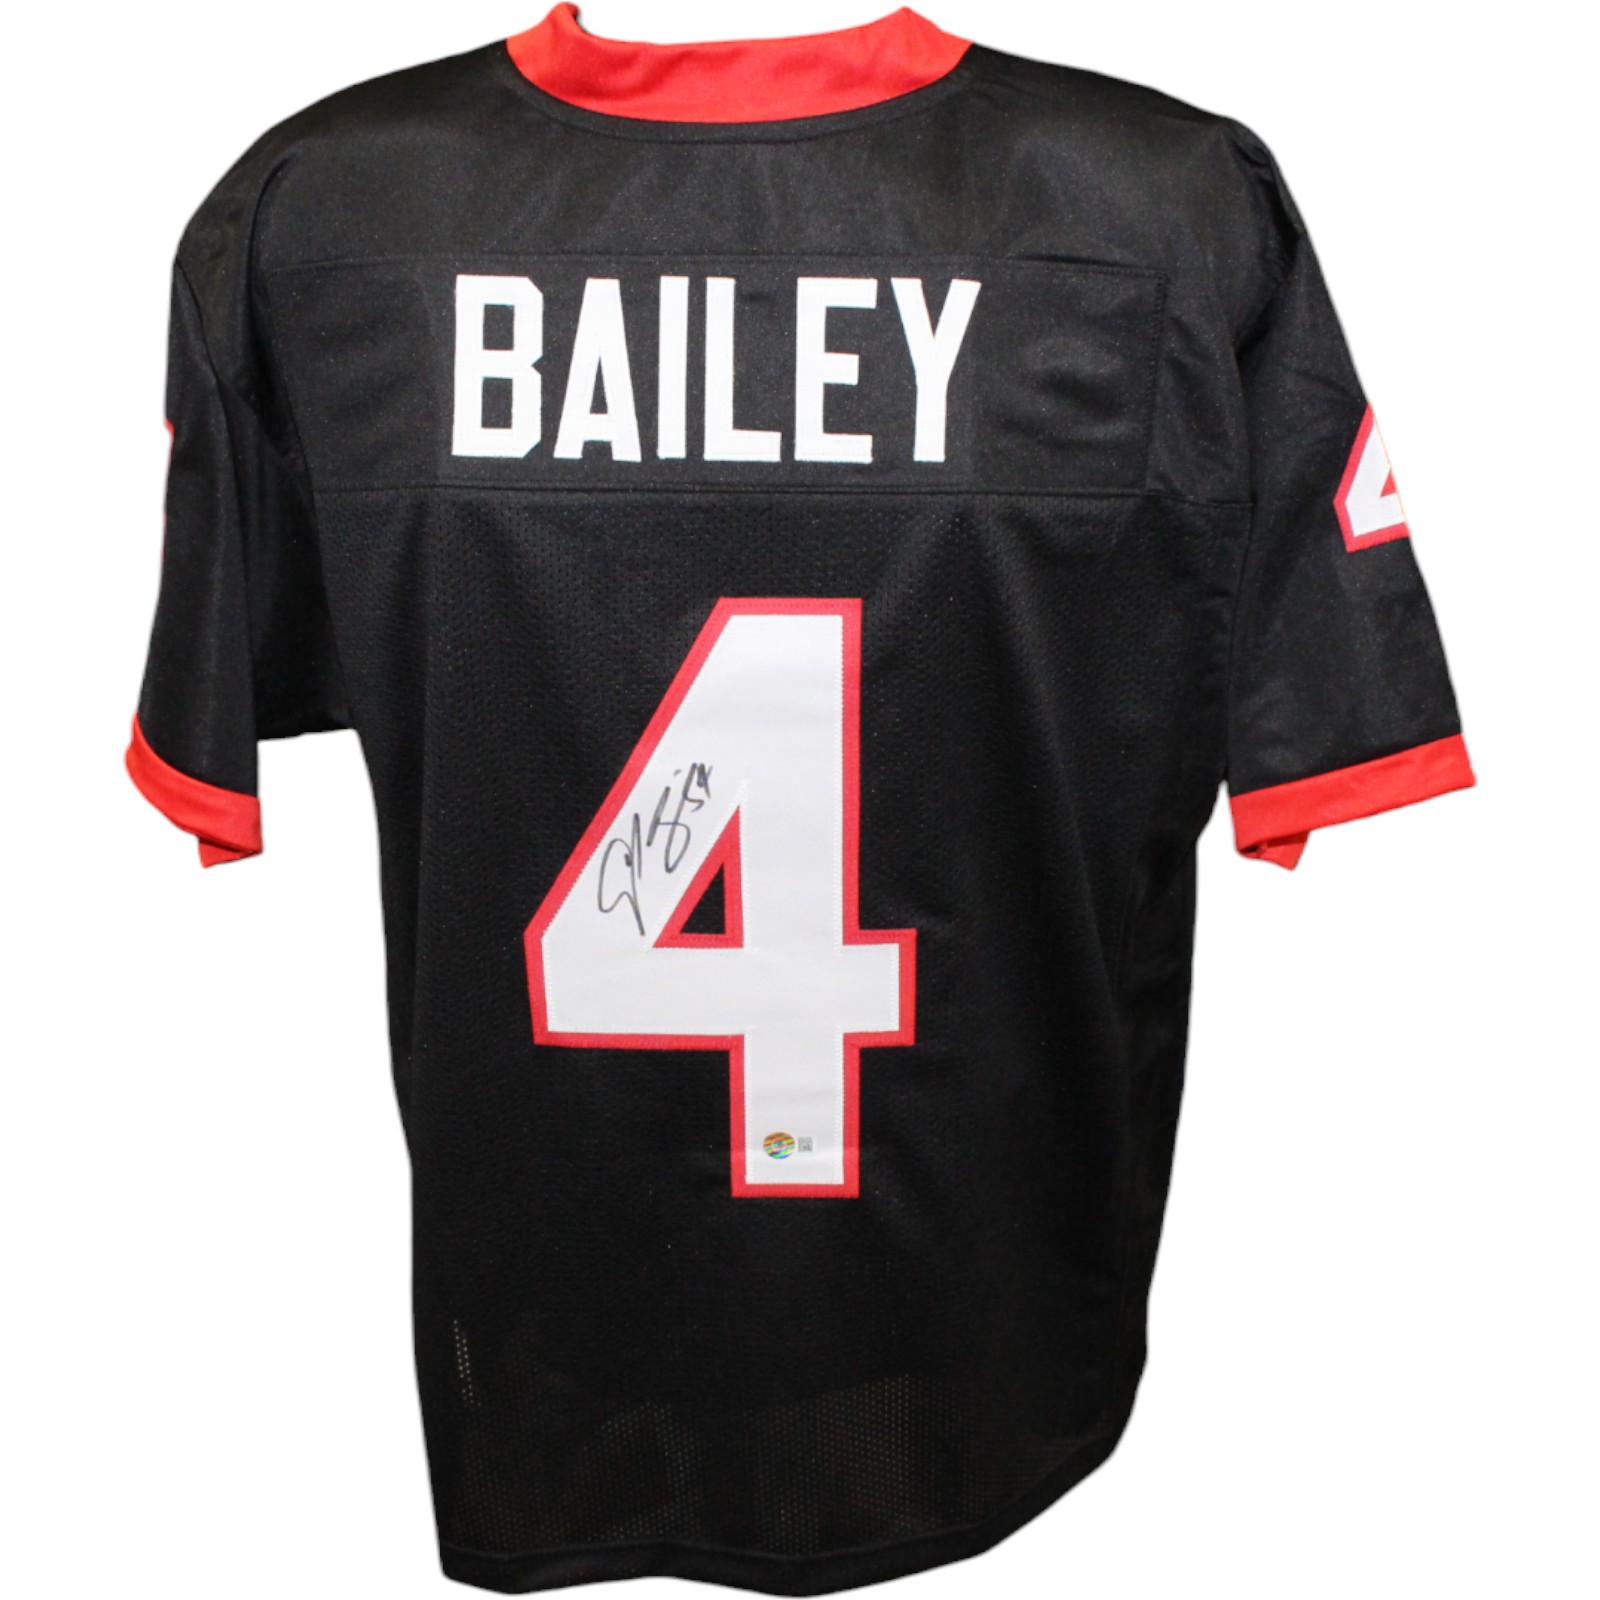 Champ Bailey Autographed/Signed College Style Black Jersey Beckett